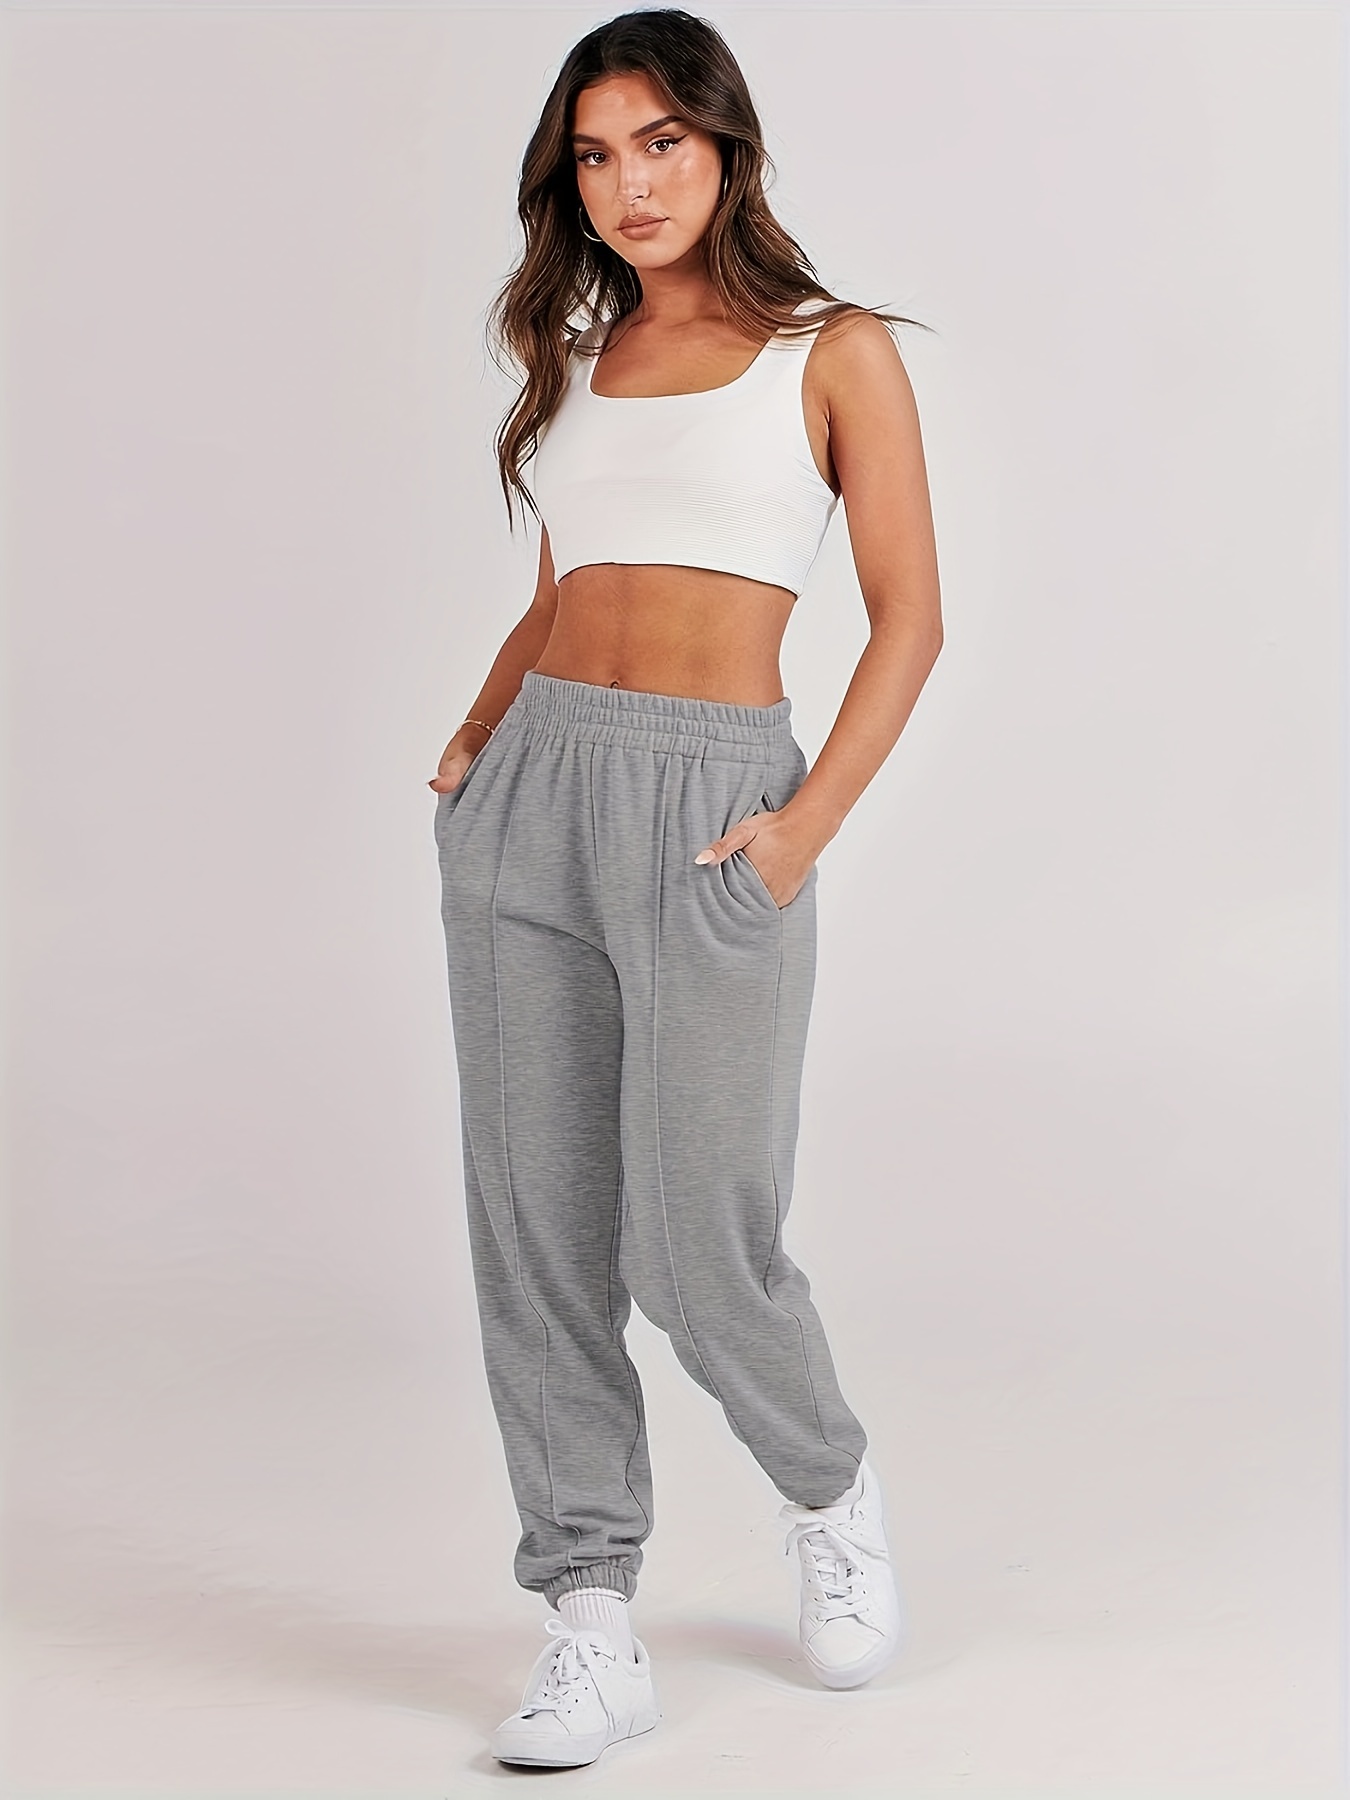 Baggy Sweatpants for Women High Waist Athletic Workout Pants Casual Jogger  Running Pants with Pockets : : Clothing, Shoes & Accessories